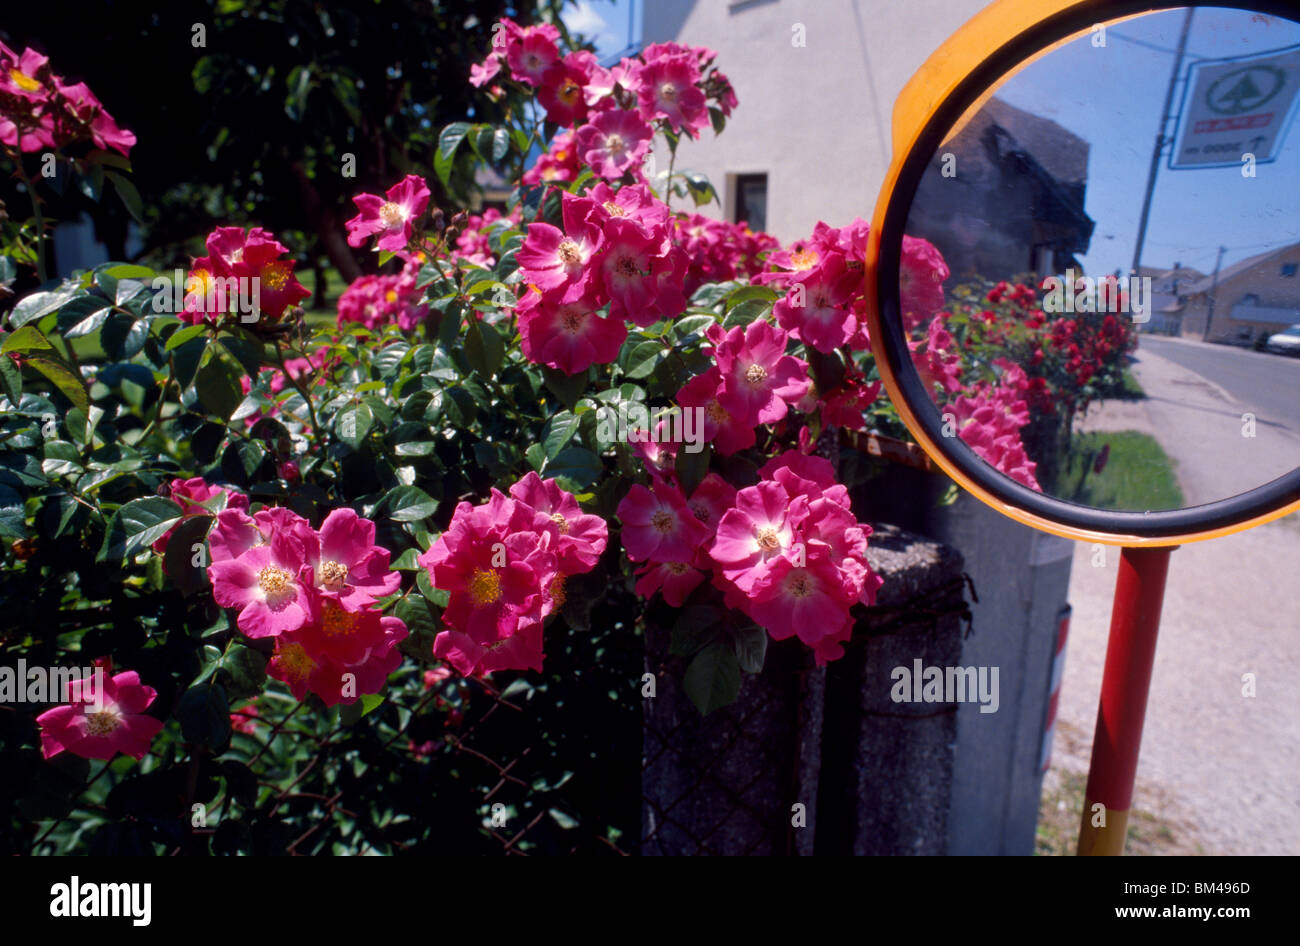 Slovenia, 15 June 2009 -- Reflection of flowers in traffic mirror in a village near 'Lesce-Bled' train station. Stock Photo